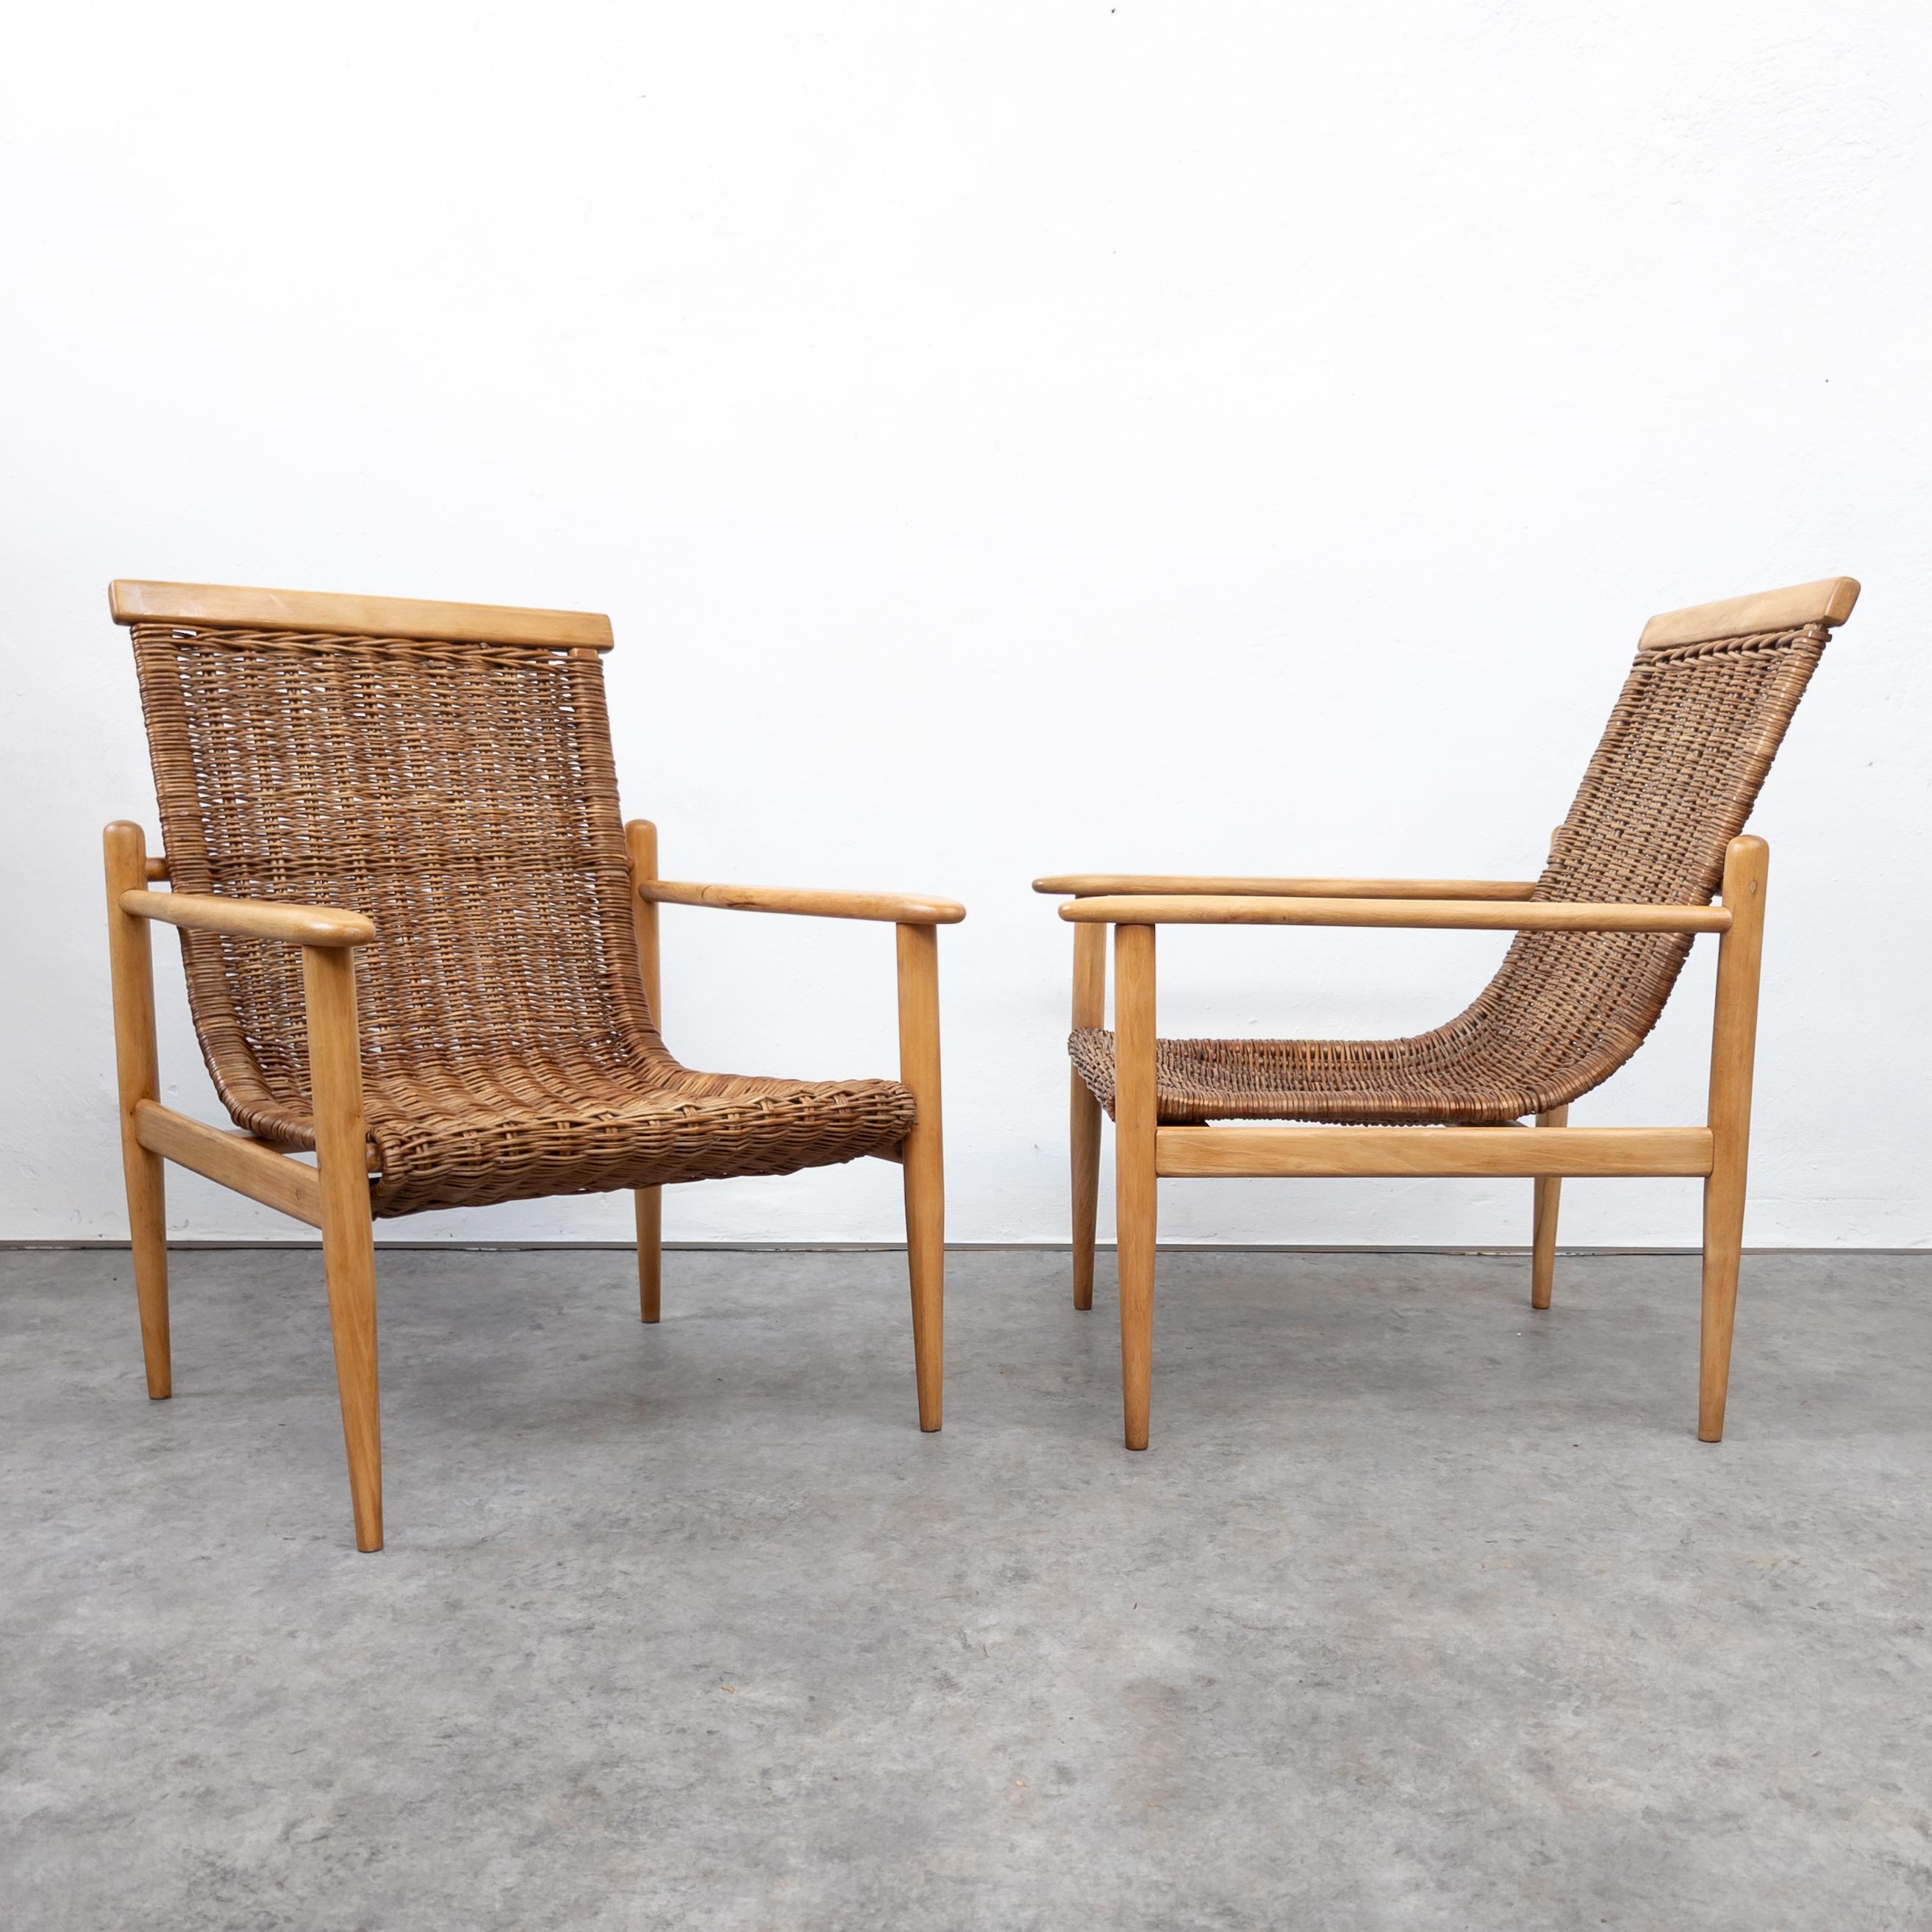 Pair of rare and unique armchairs designed by Czech architect Jan Kalous. Manufactured by ÚLUV co-op, former Czechoslovakia in 1960s. Made of beech wood and rattan. Wooden frame completely expertly restored, rattan seat in very good original